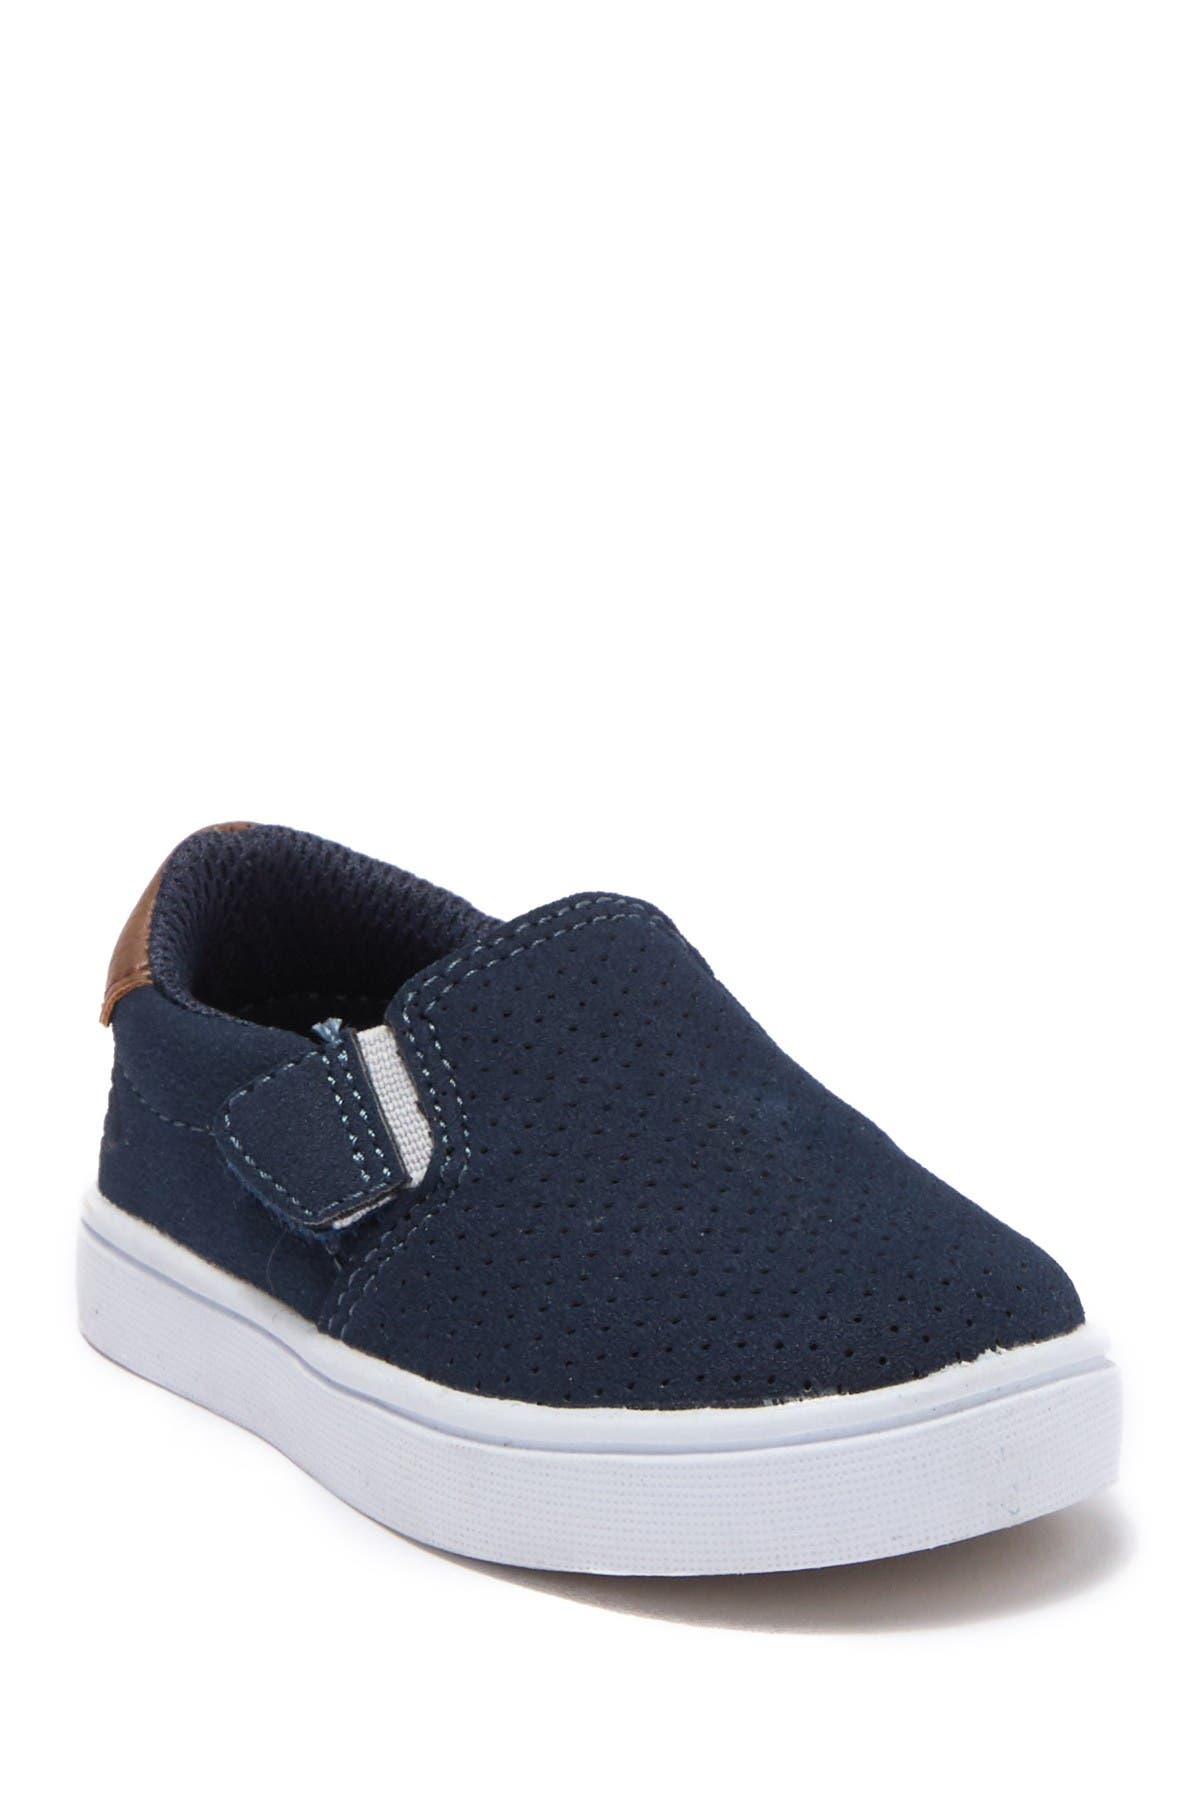 Madison Boy Perforated Slip-On Sneaker 